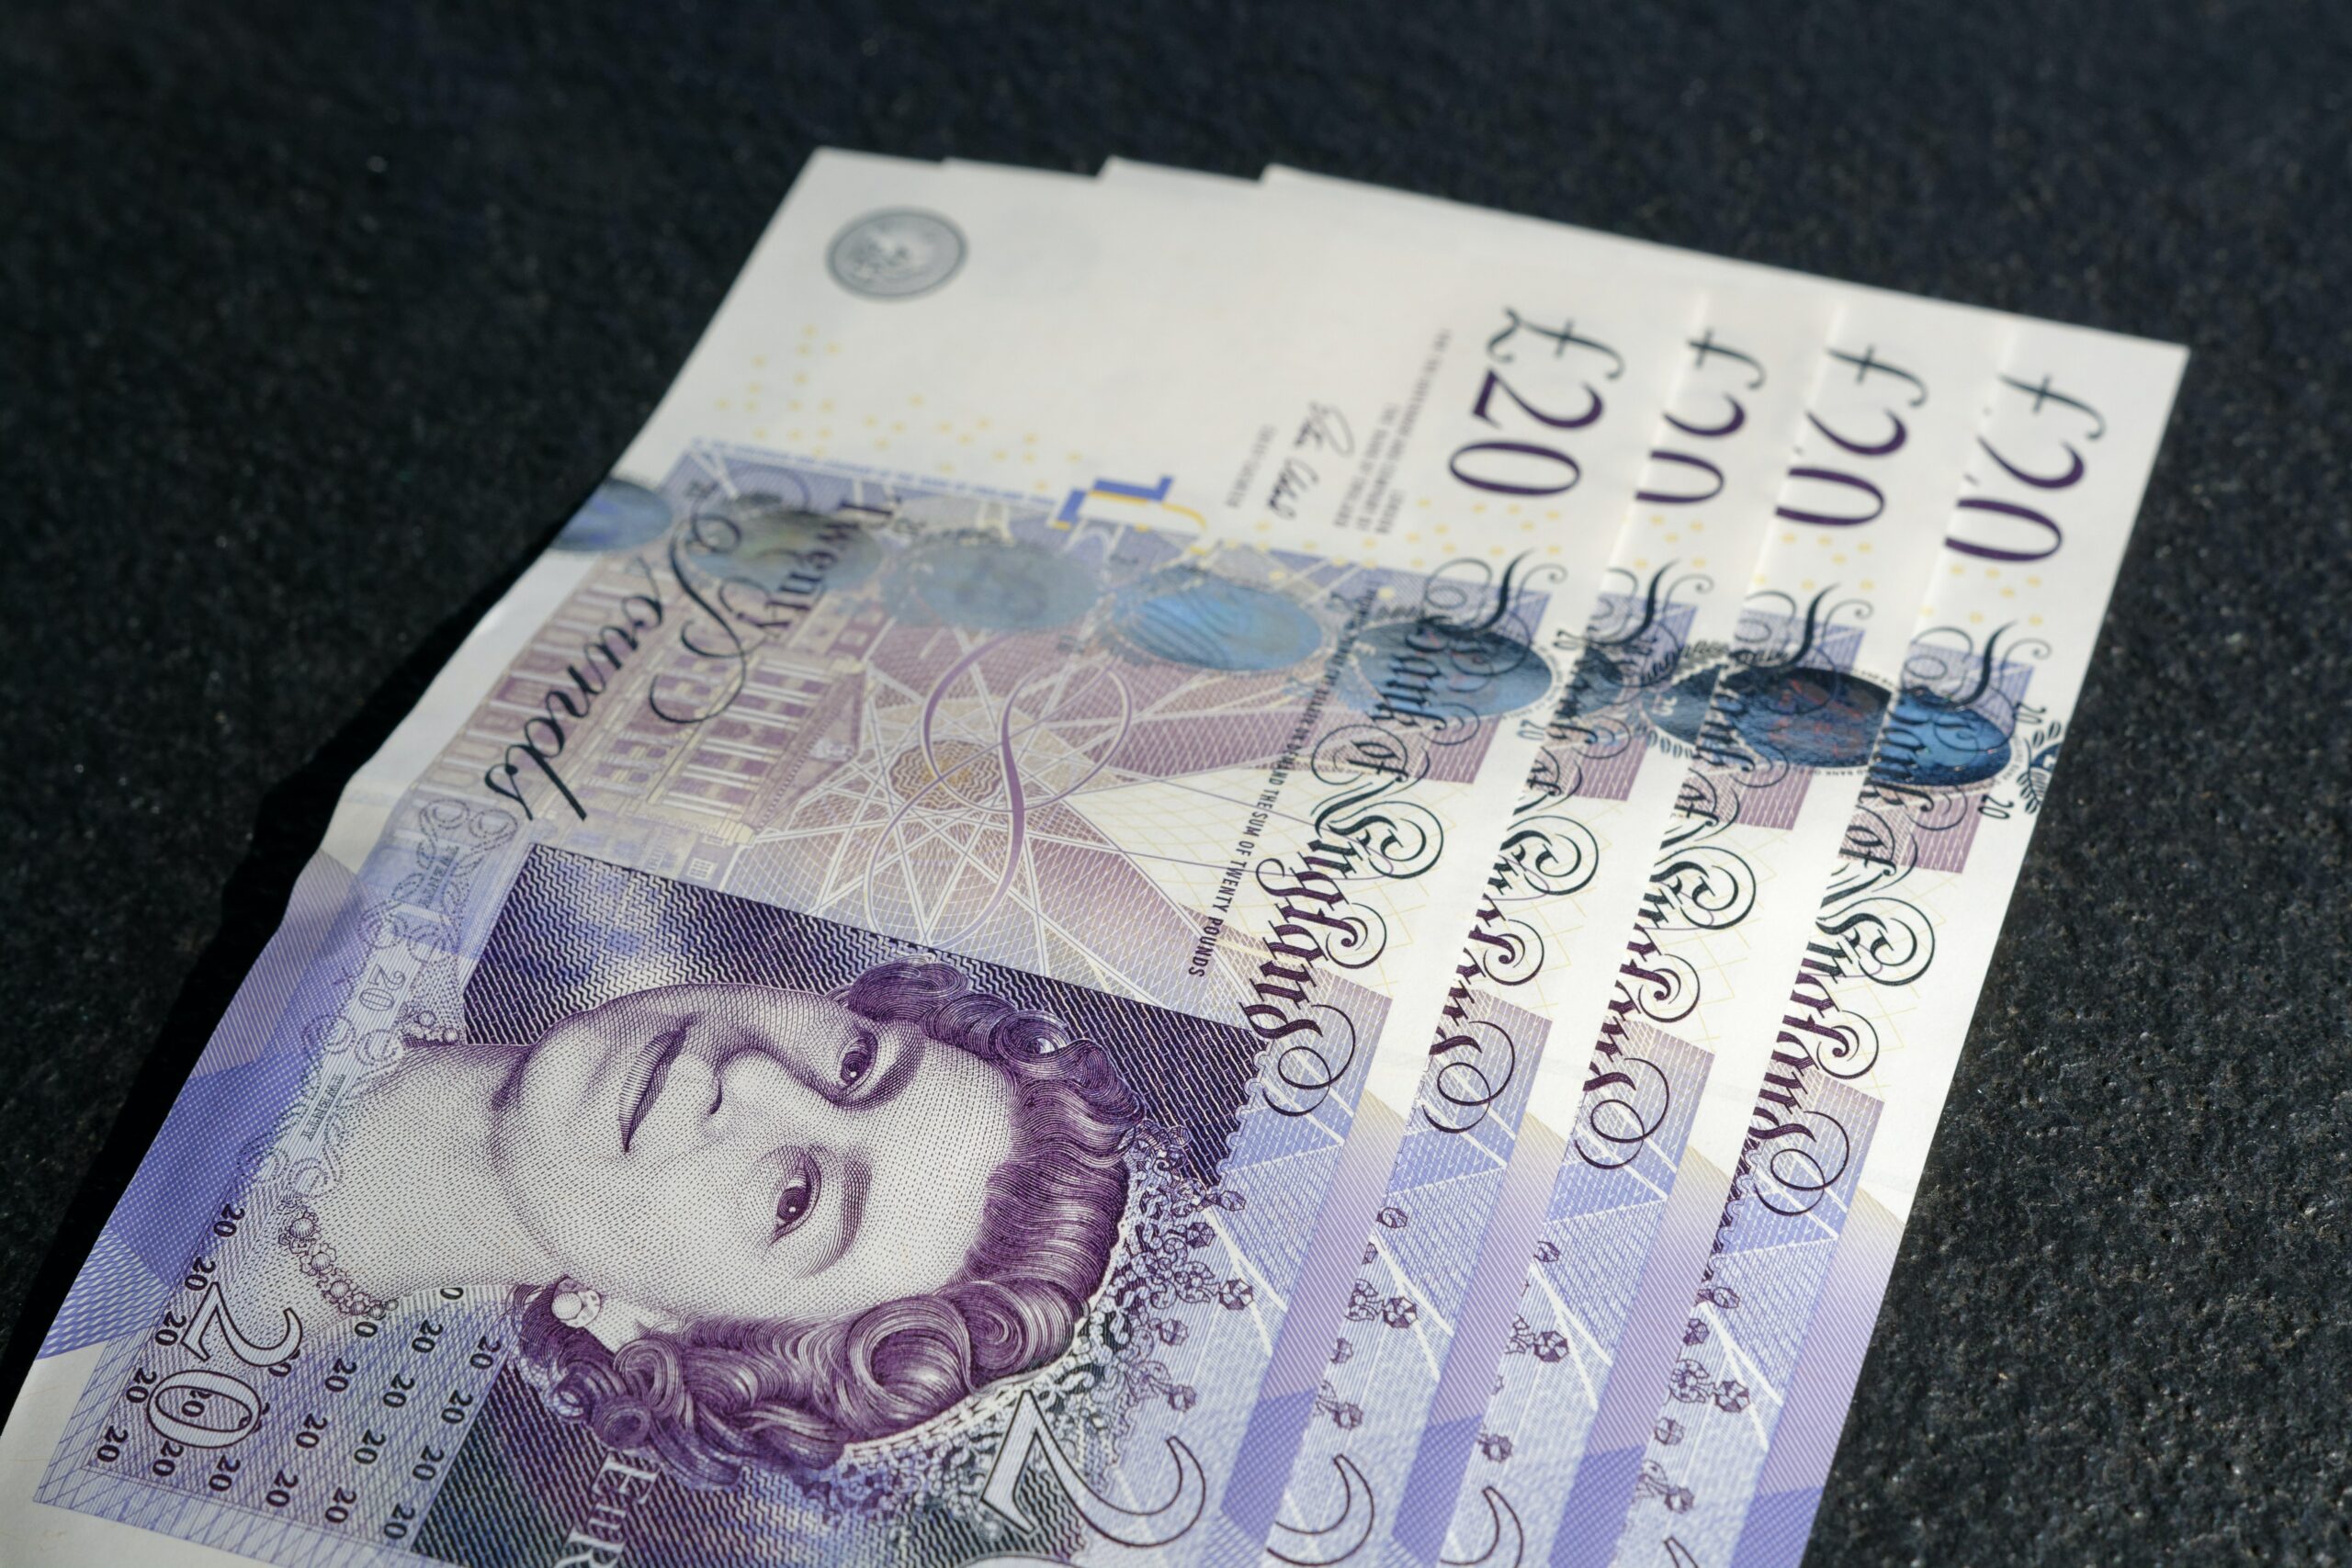 Four twenty pound notes, sitting slightly splayed out. They are purple and white sitting on a black background.